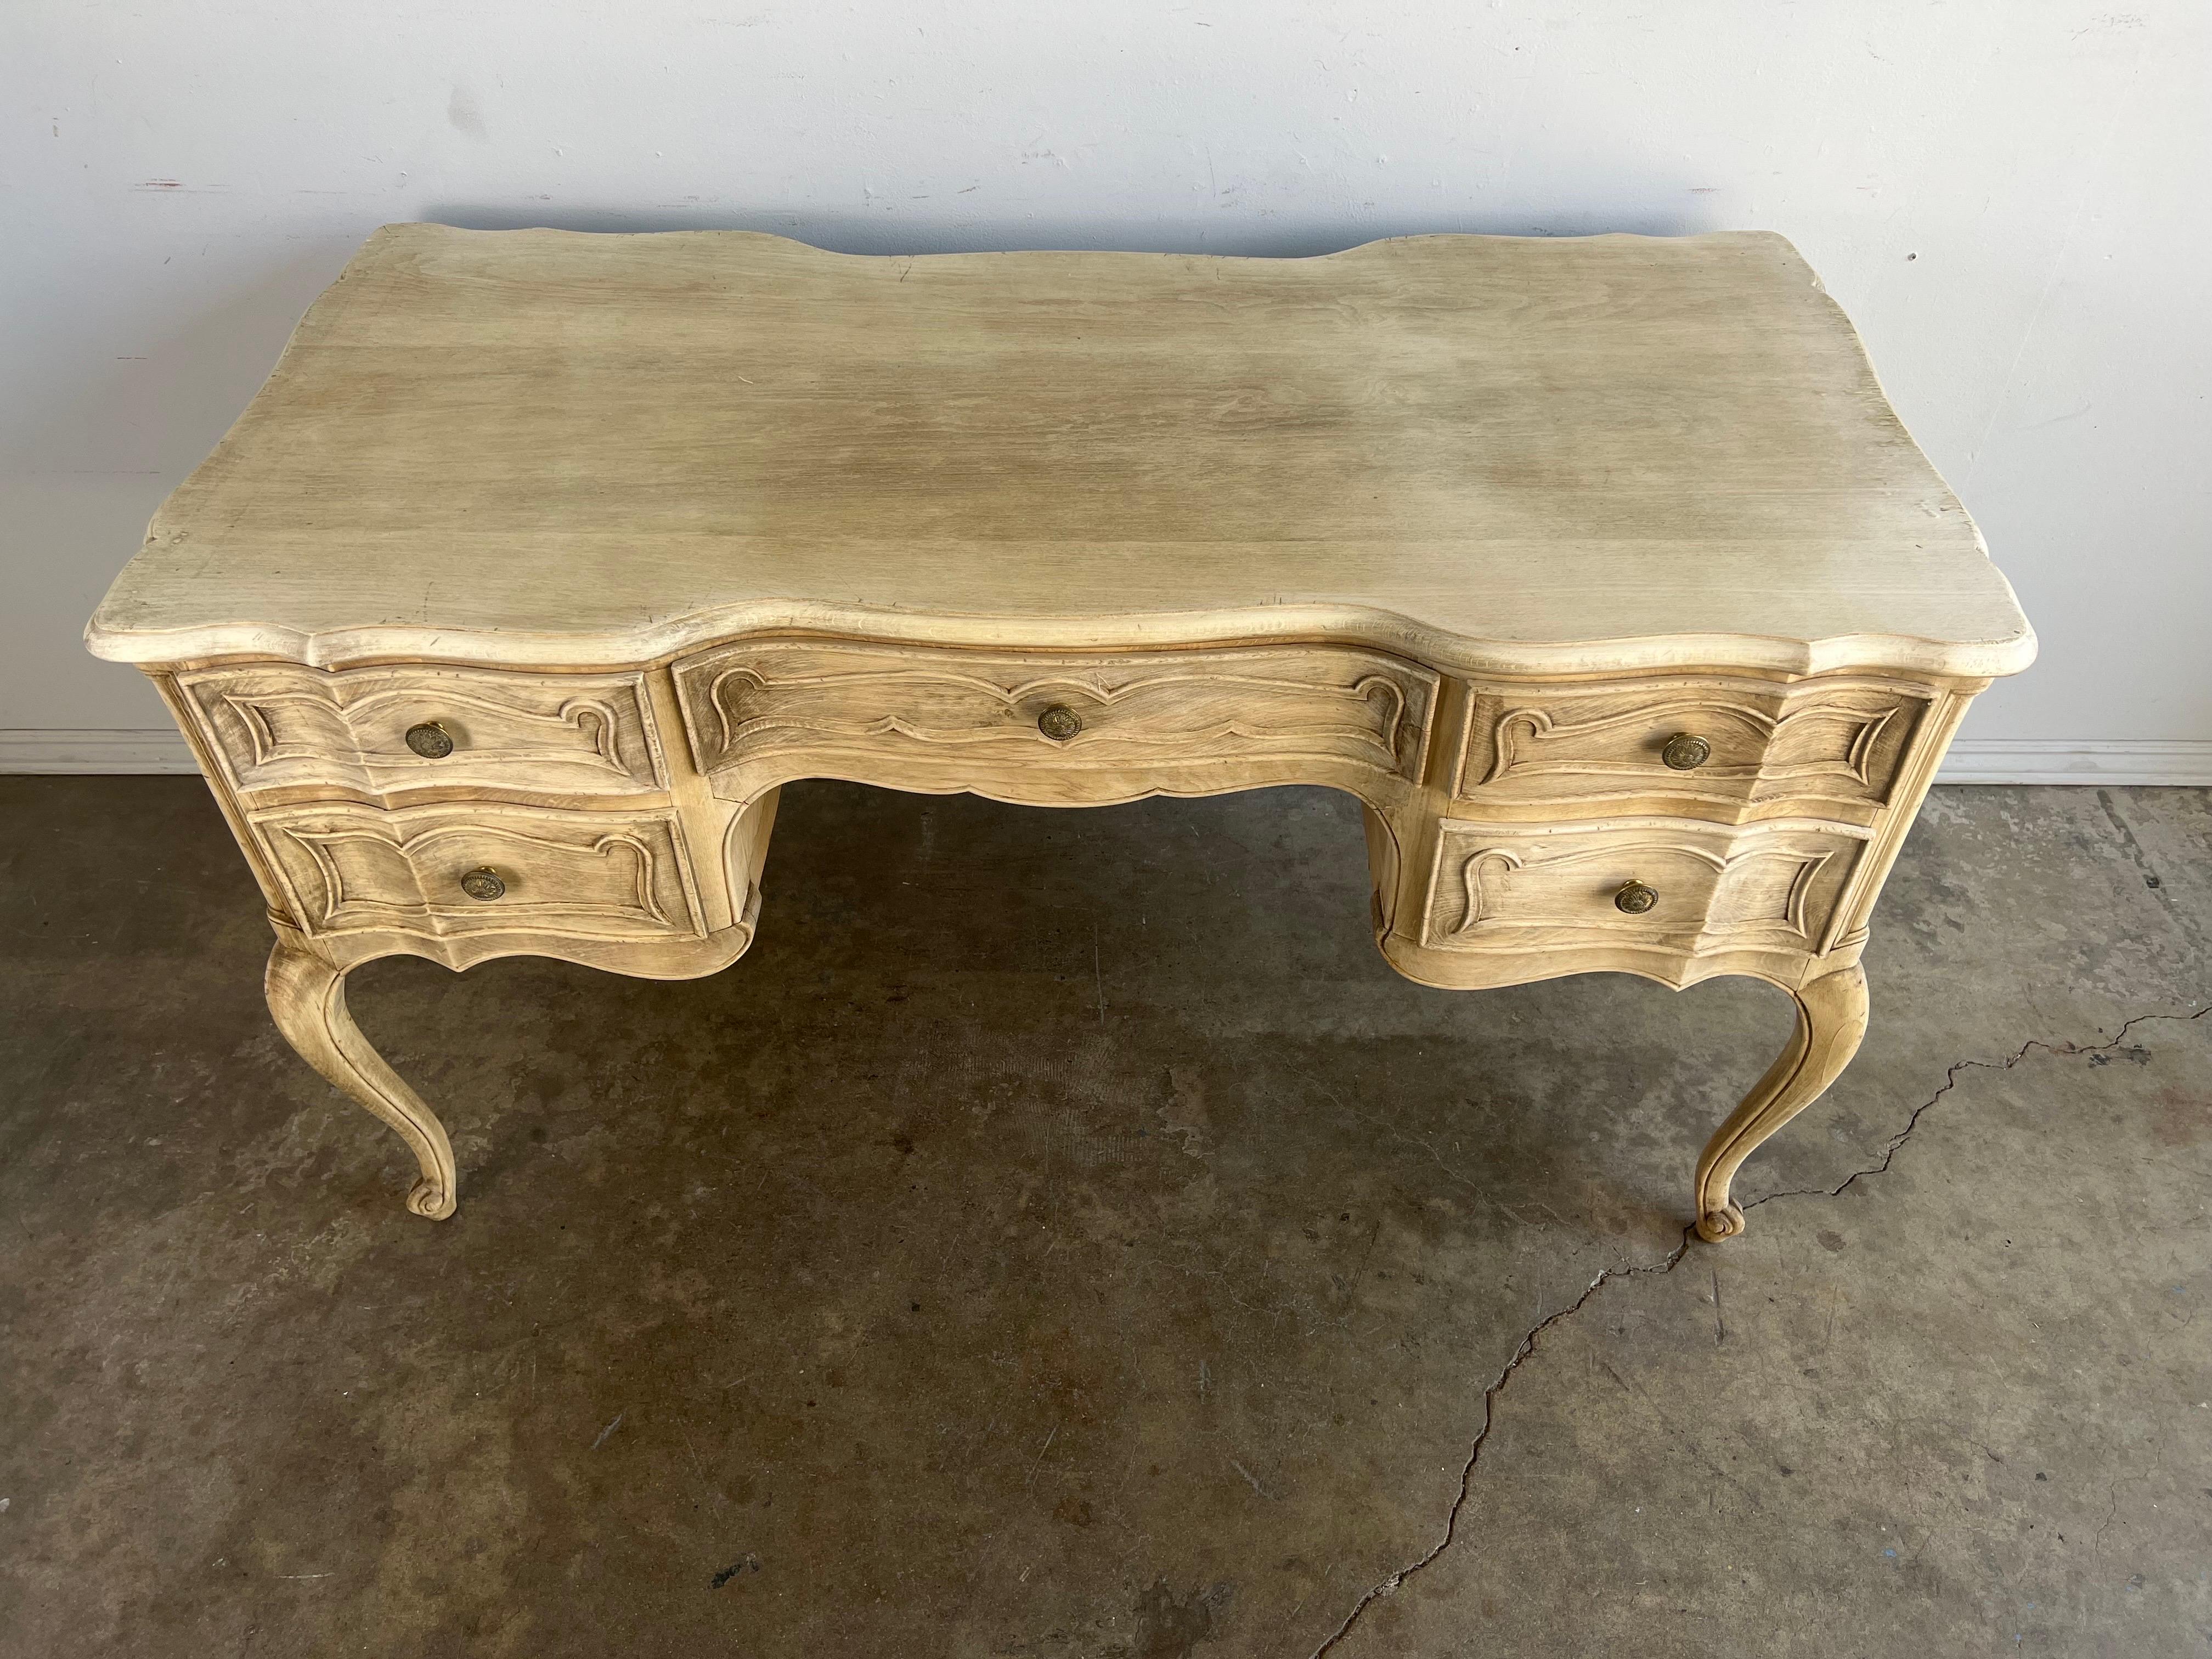 French Provencal style desk standing on four cabriole legs with rams head feet. The desk has five drawers for plenty of storage. Originally cast hardware on drawers.